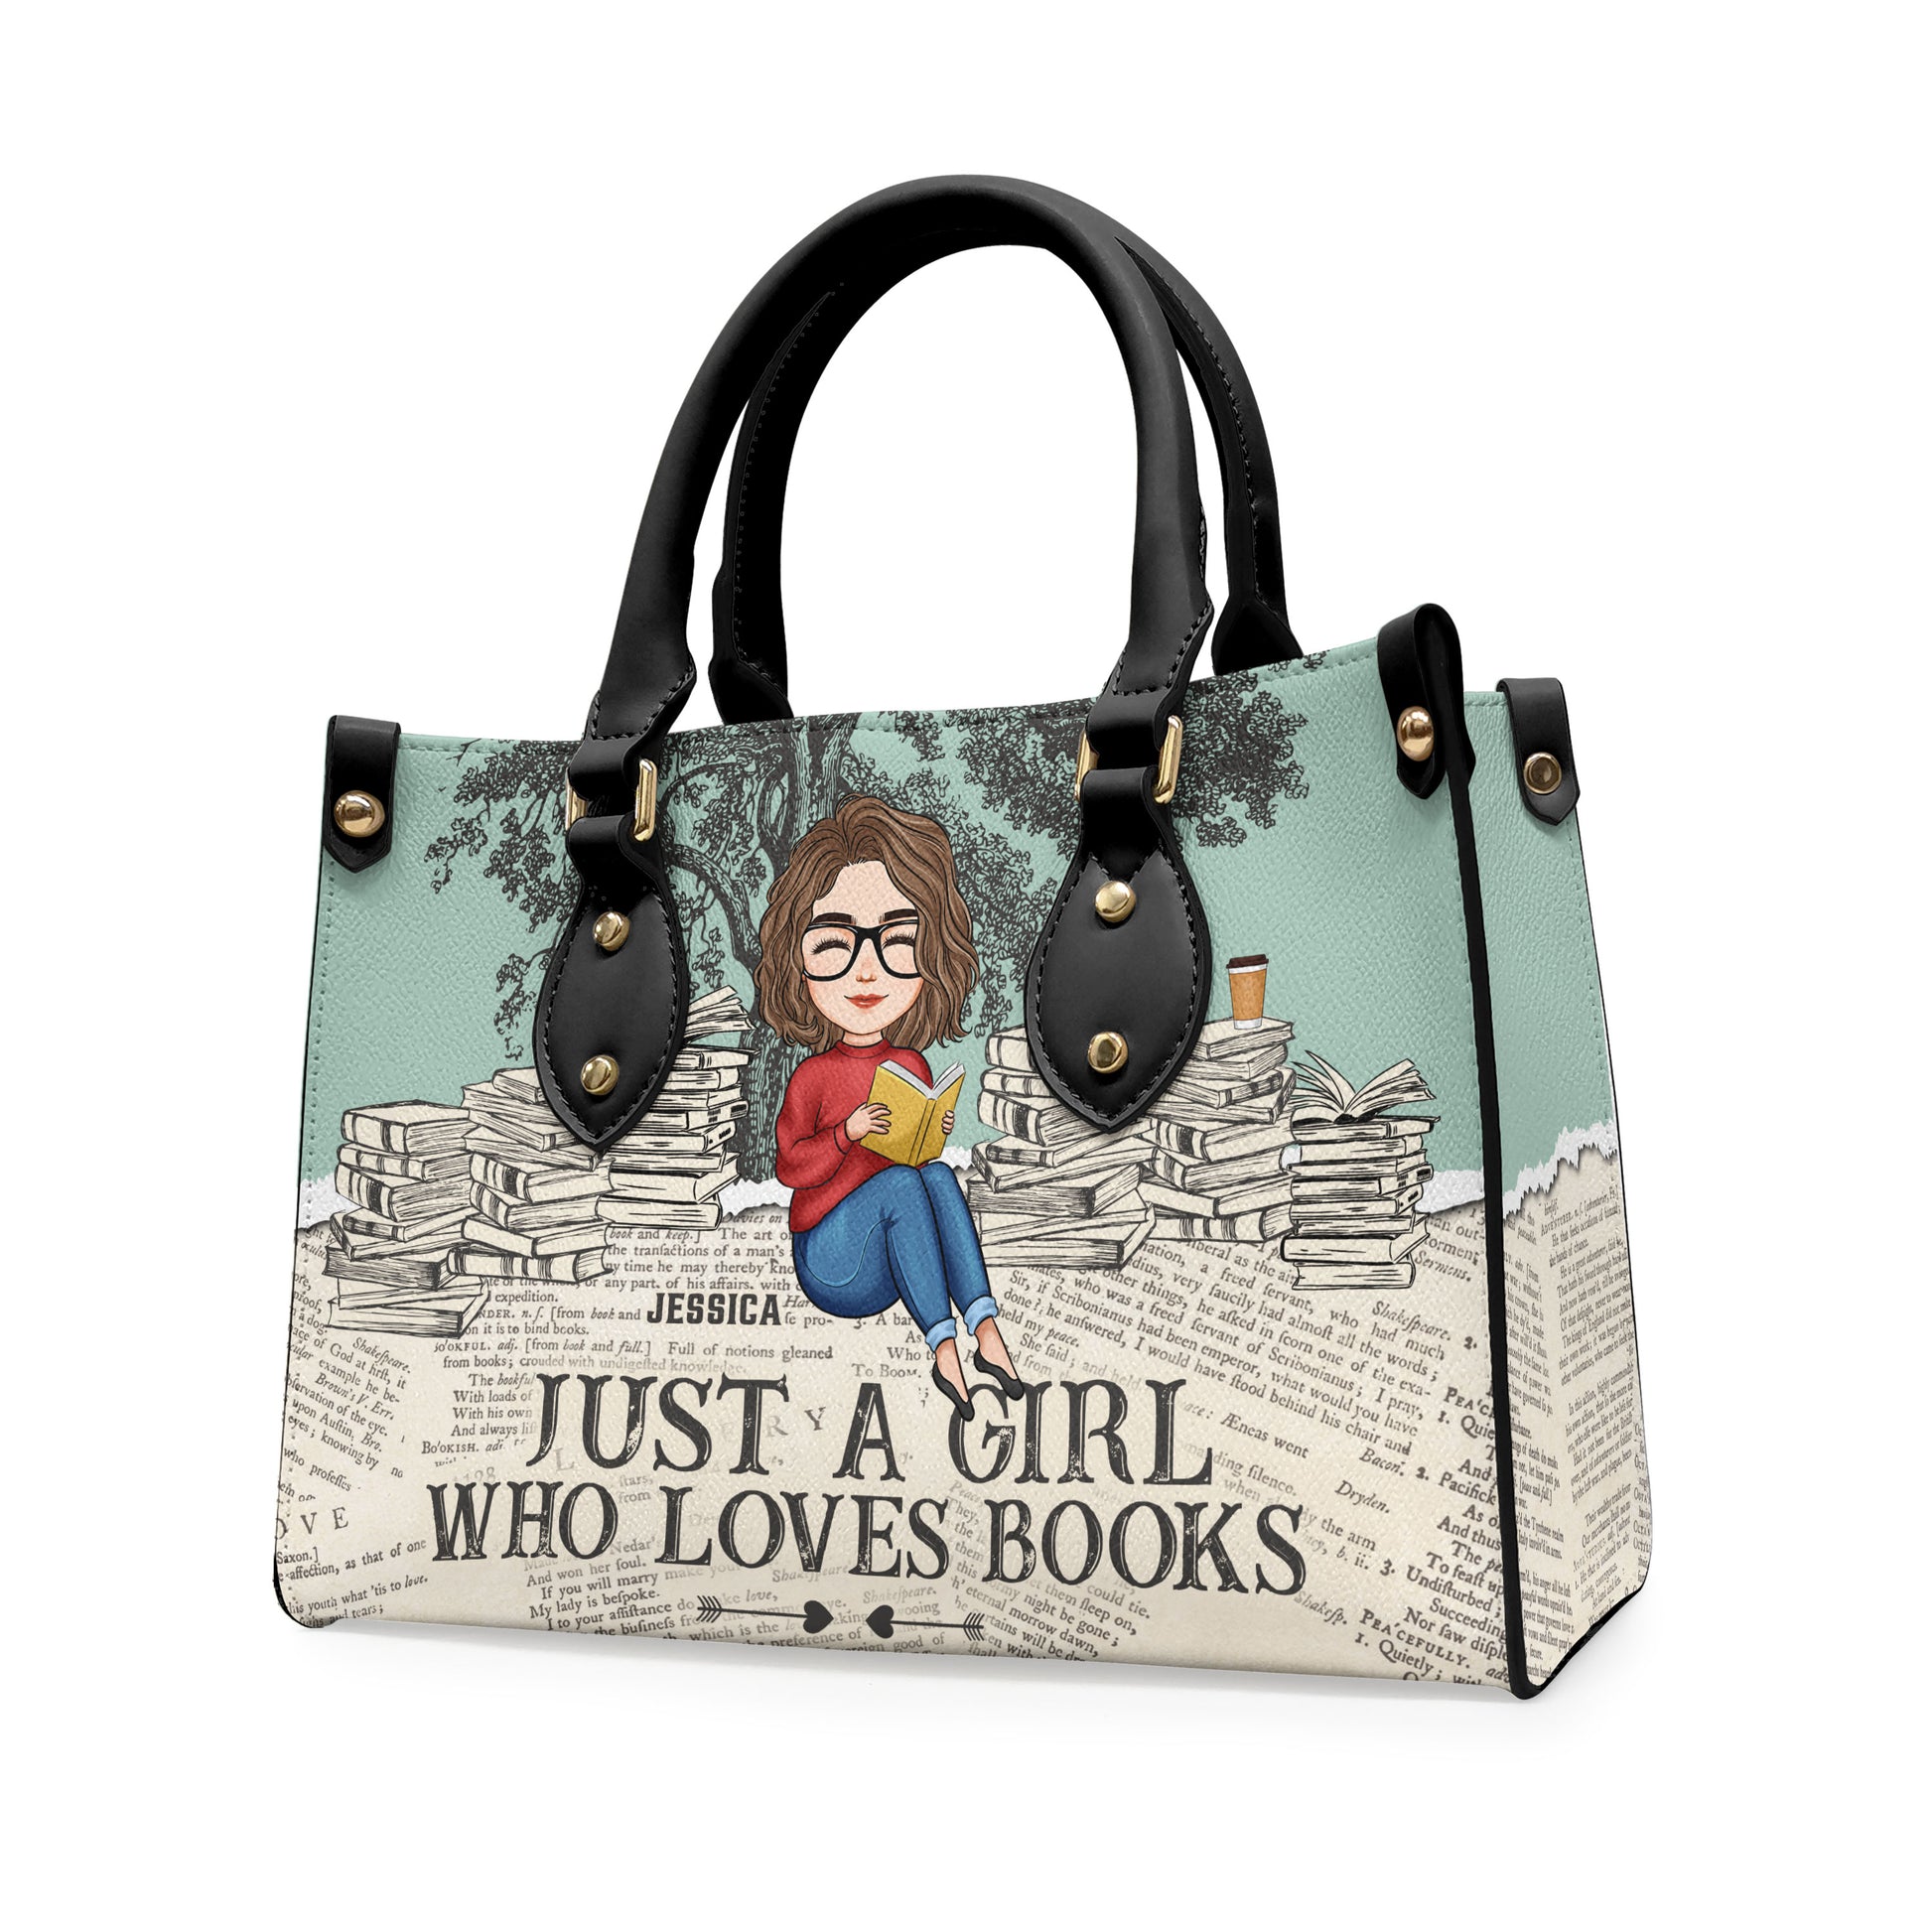 personalized tote bag, touch life bag, personalized teacher gift